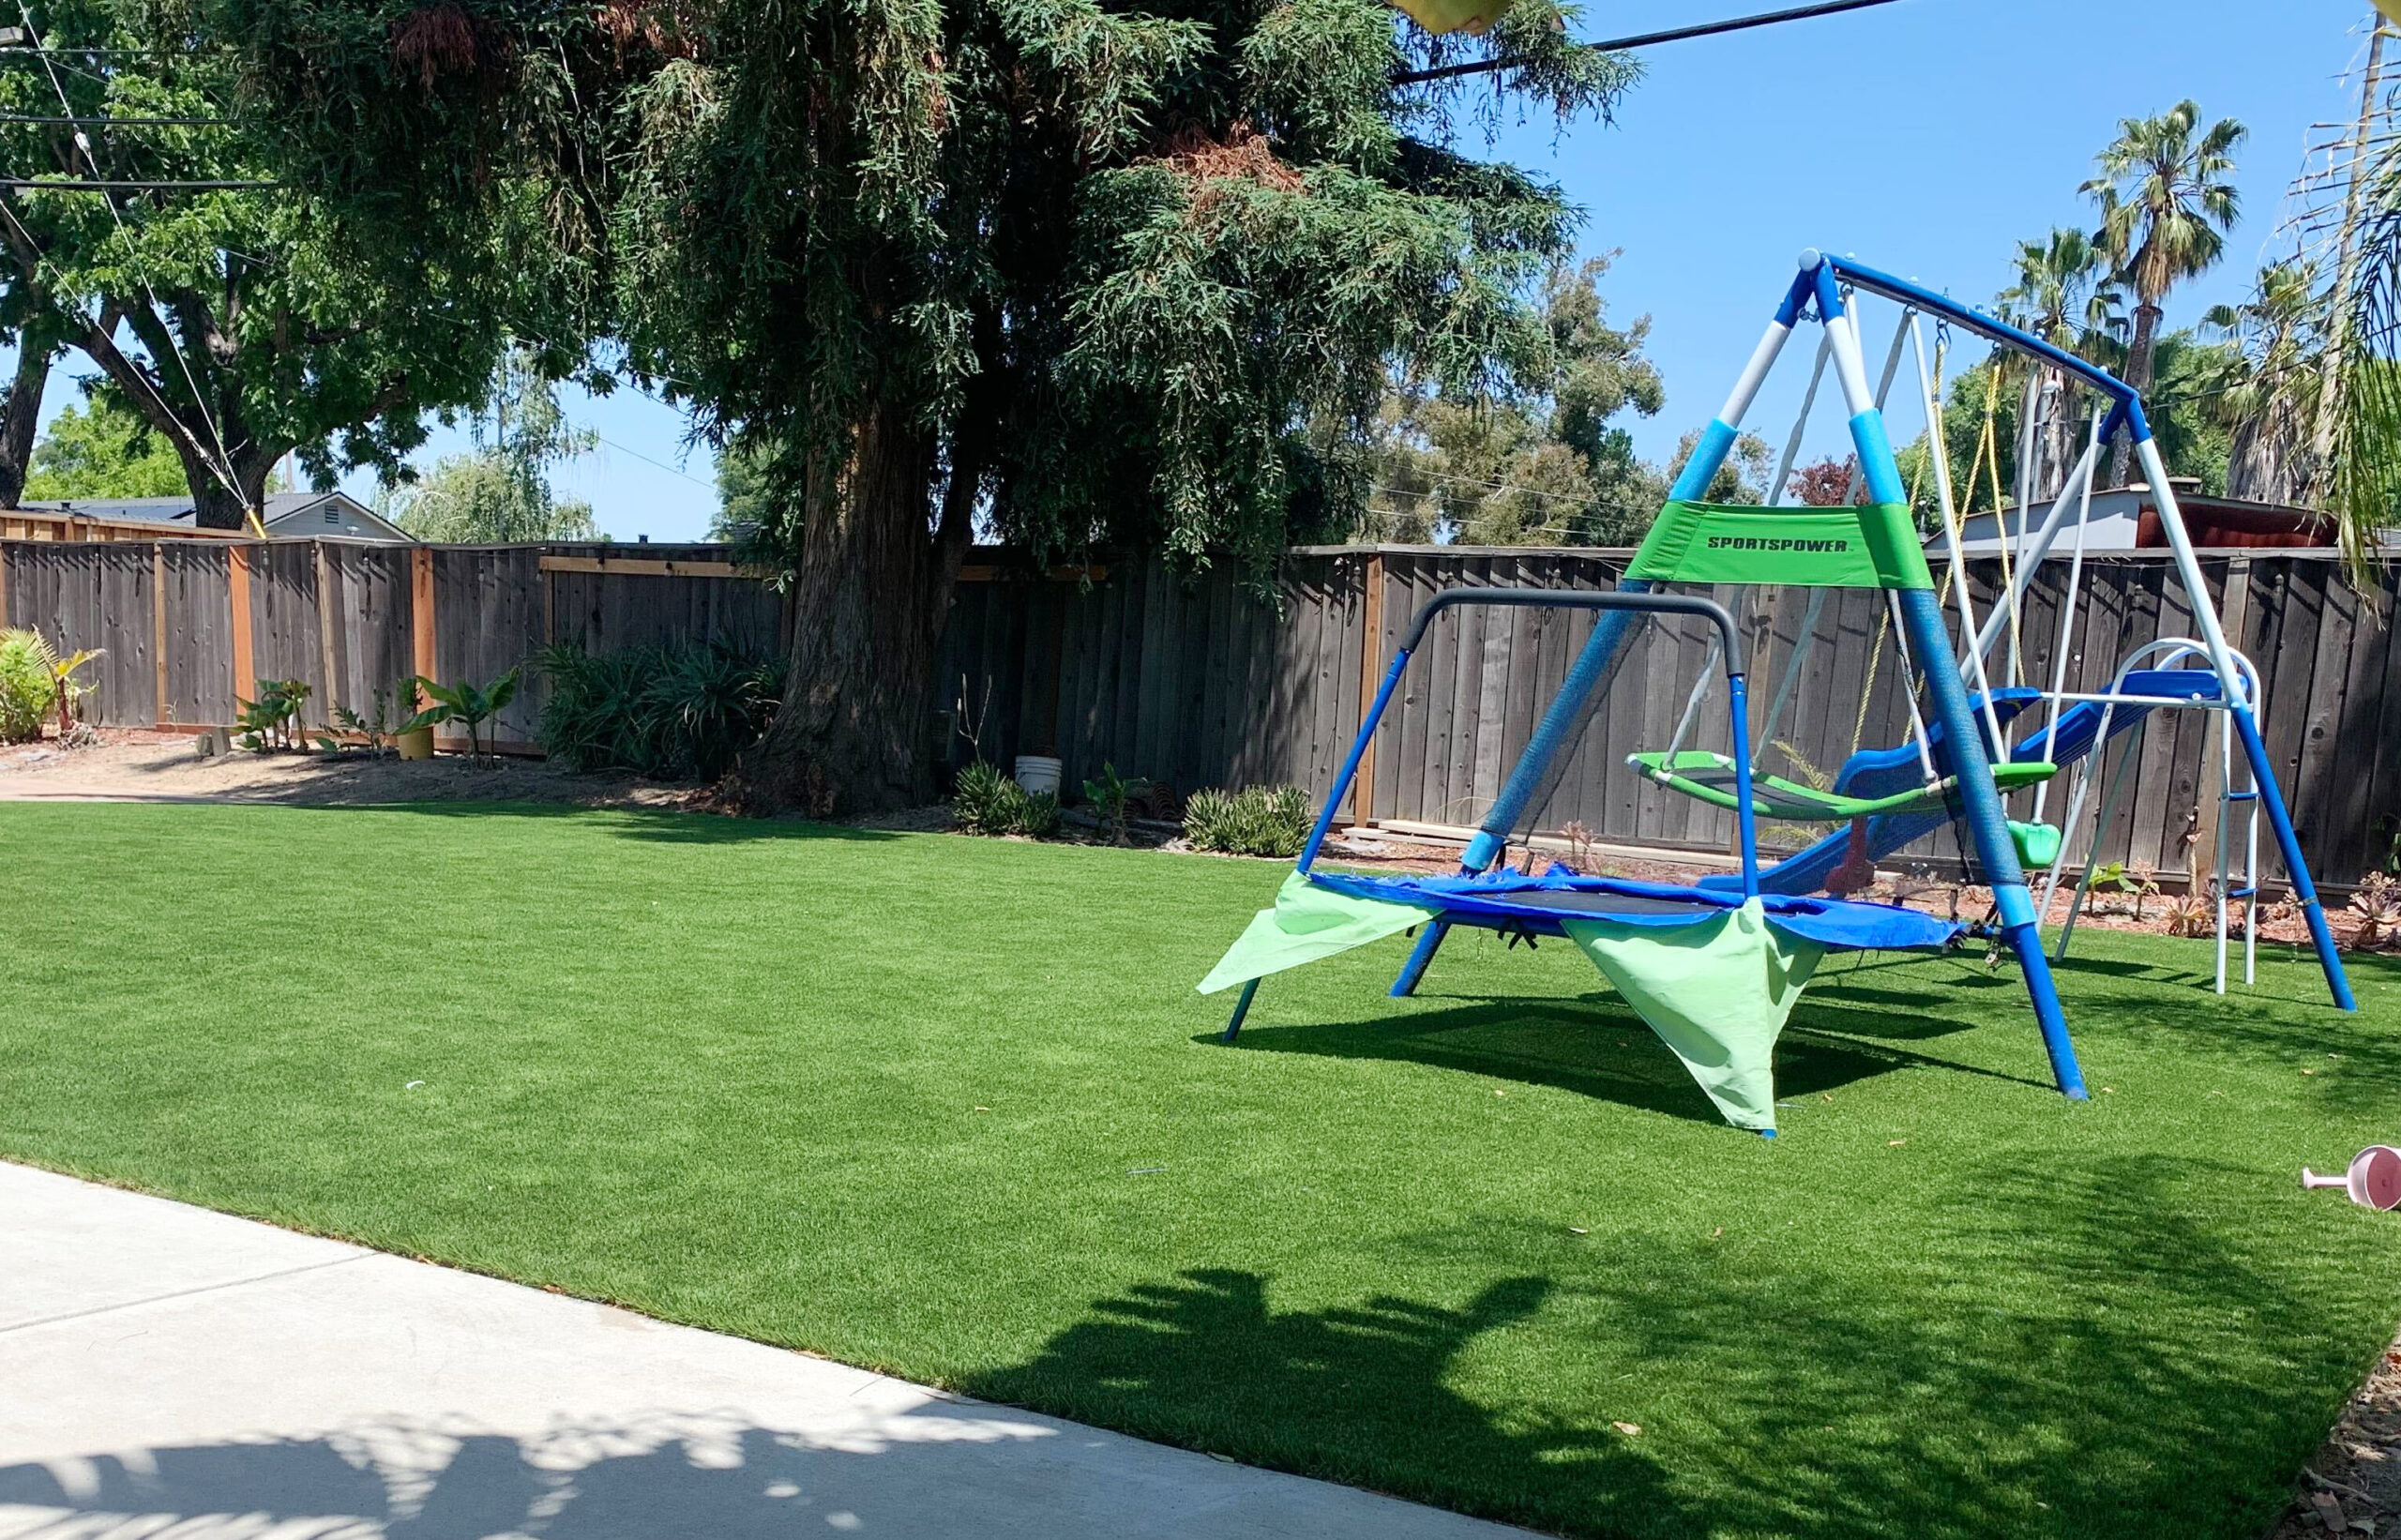 Playground Equipment That Works Well with Artificial Grass Surfaces